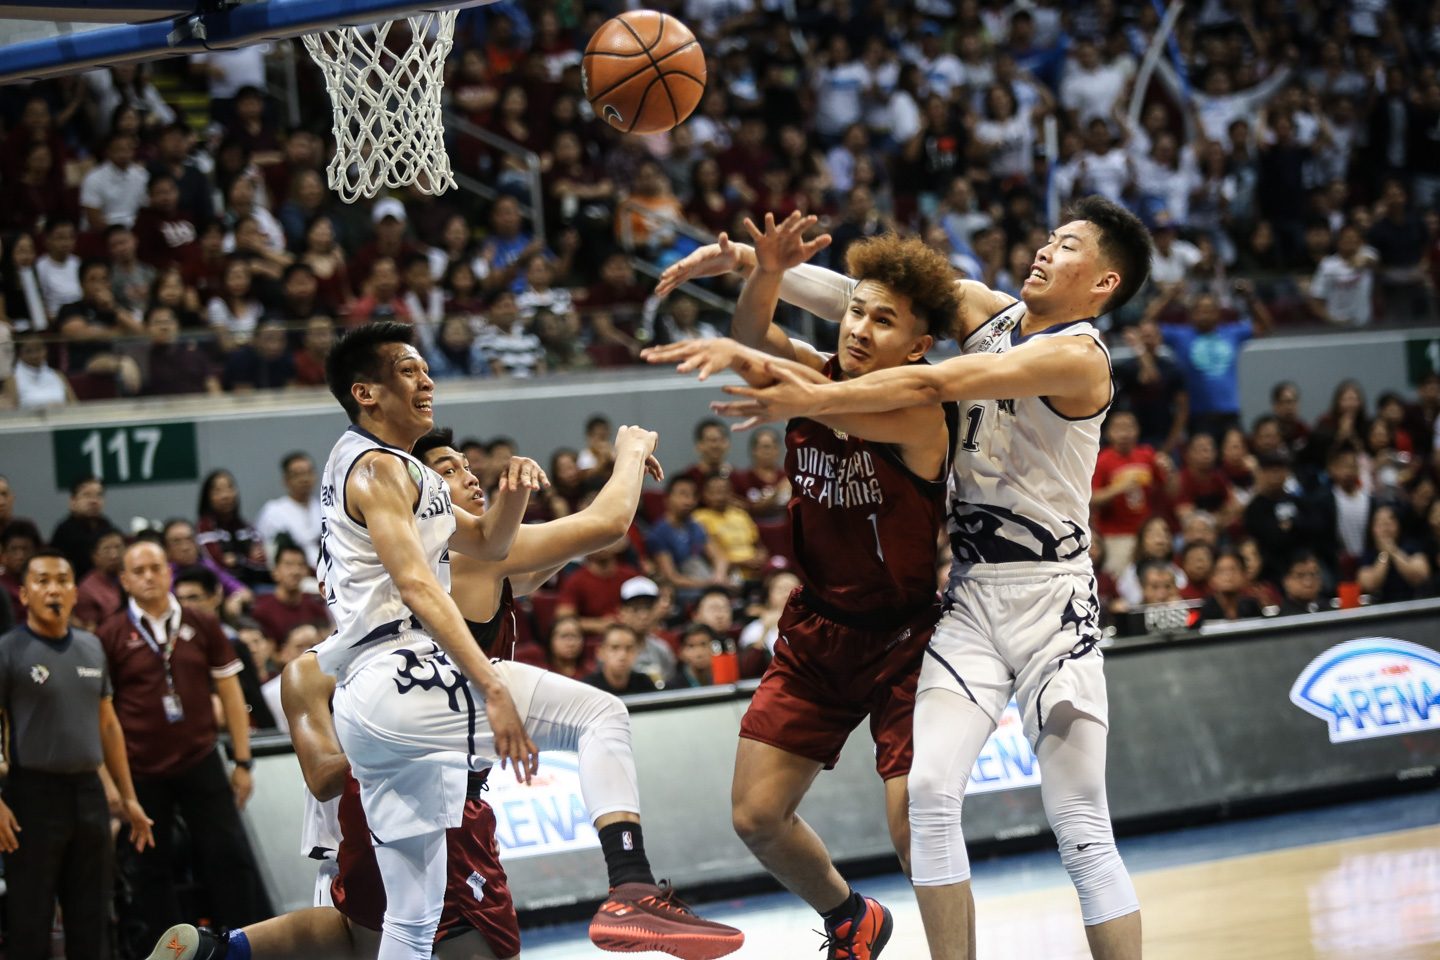 Adamson to give free tickets for do-or-die UAAP semis duel vs UP